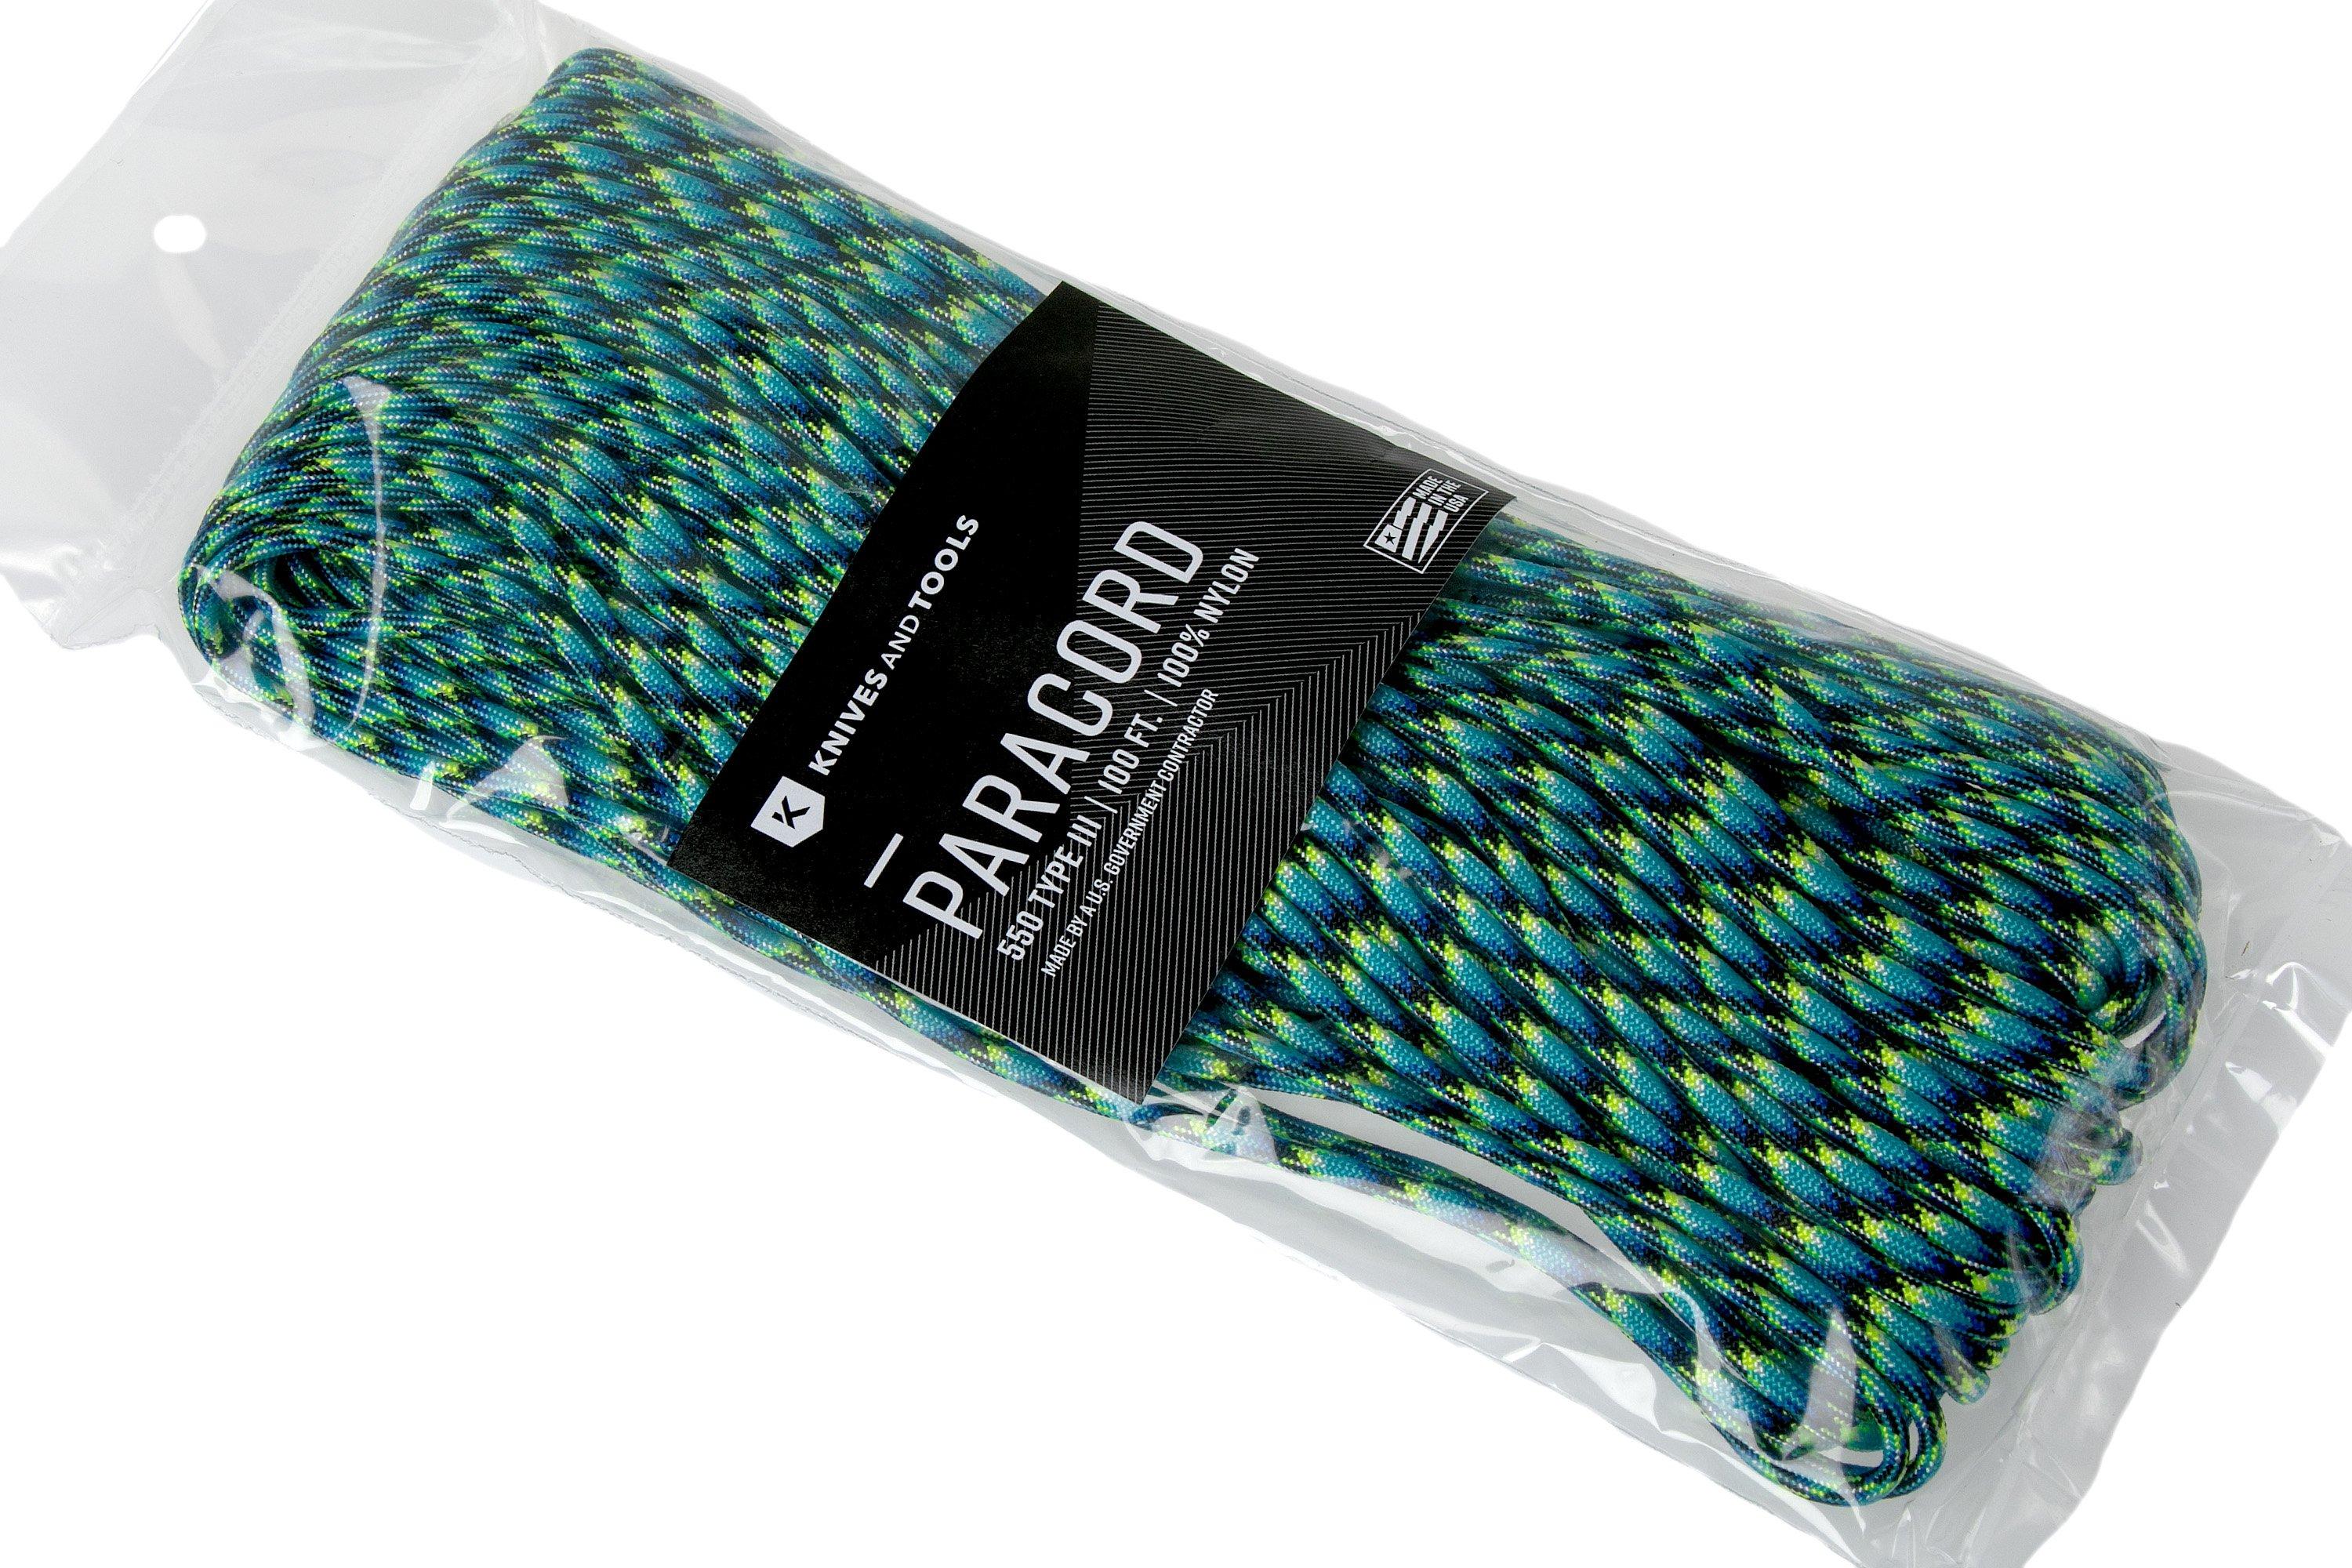 Knivesandtools 550 paracord type III, colour: oceans of fire, 100 ft (30.48  m)